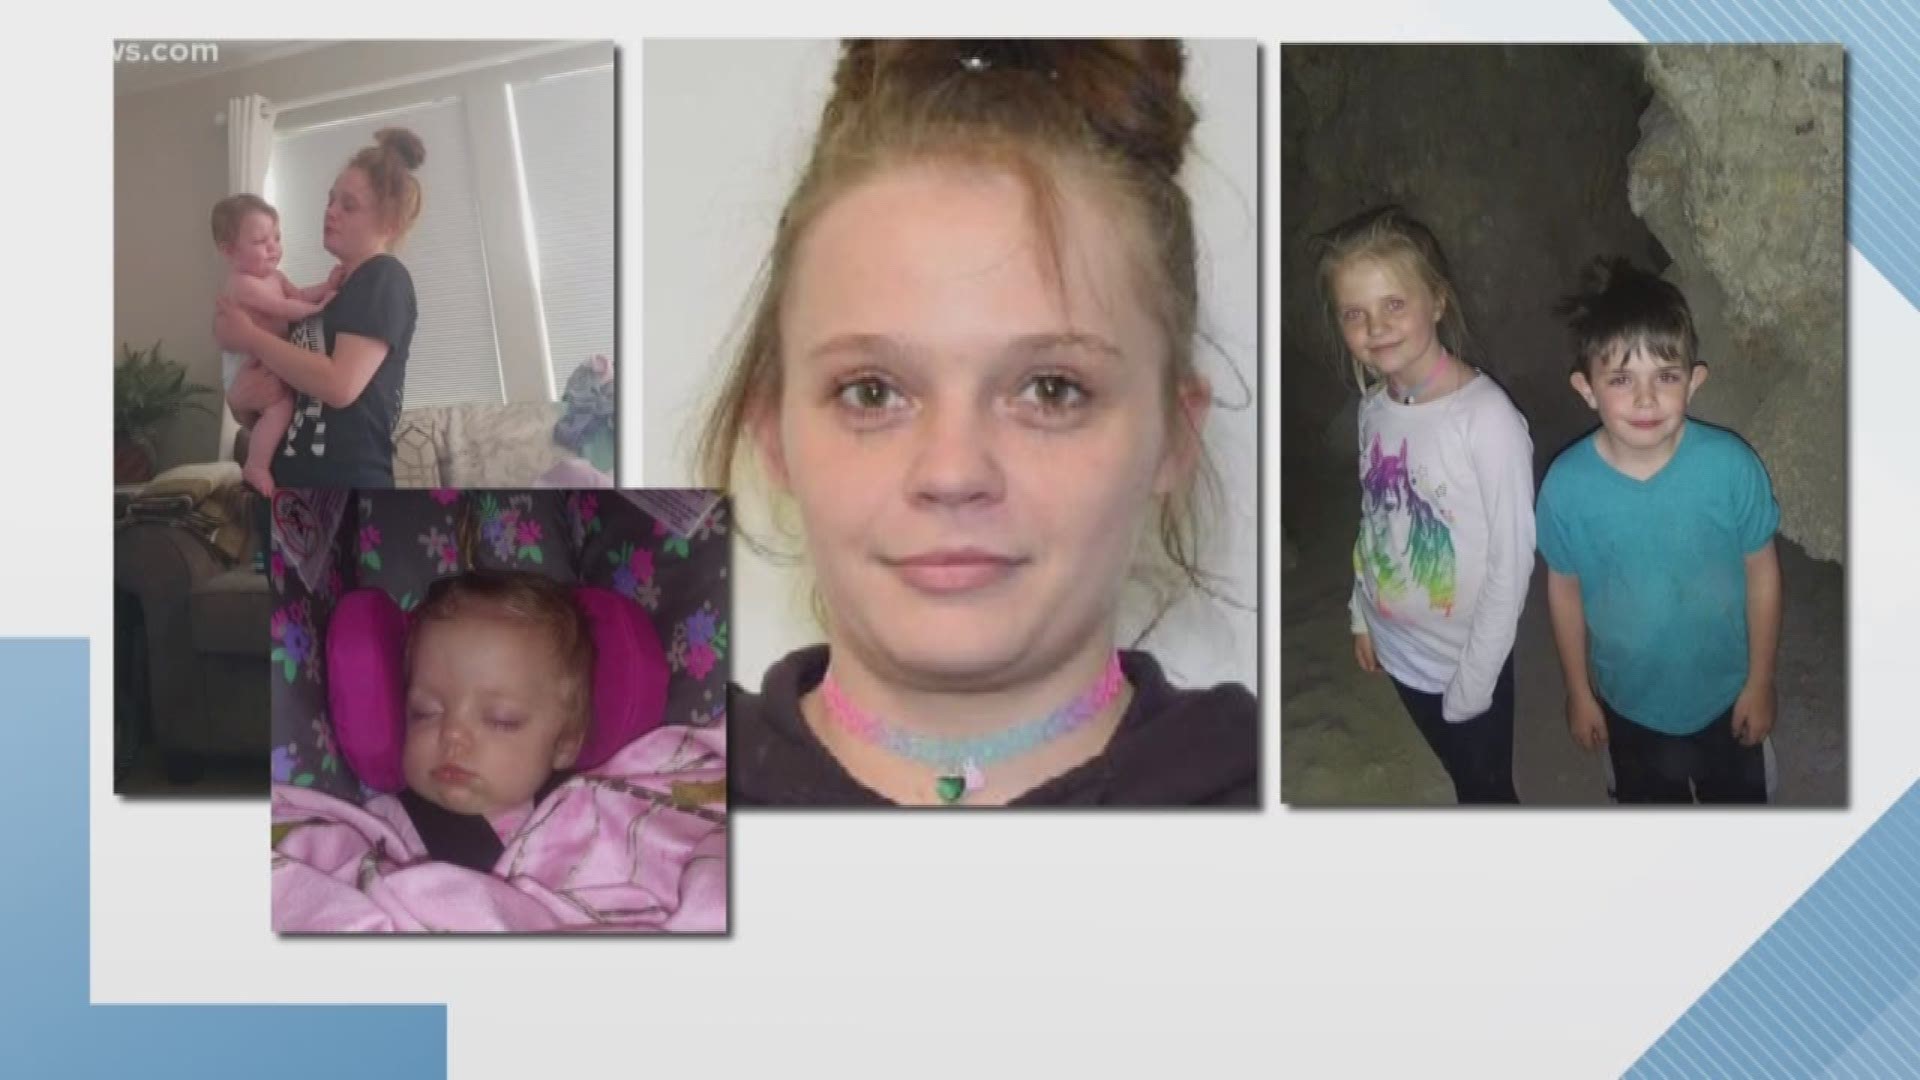 27-year-old Shiann Moore and her three young children have been located safely in Evans.